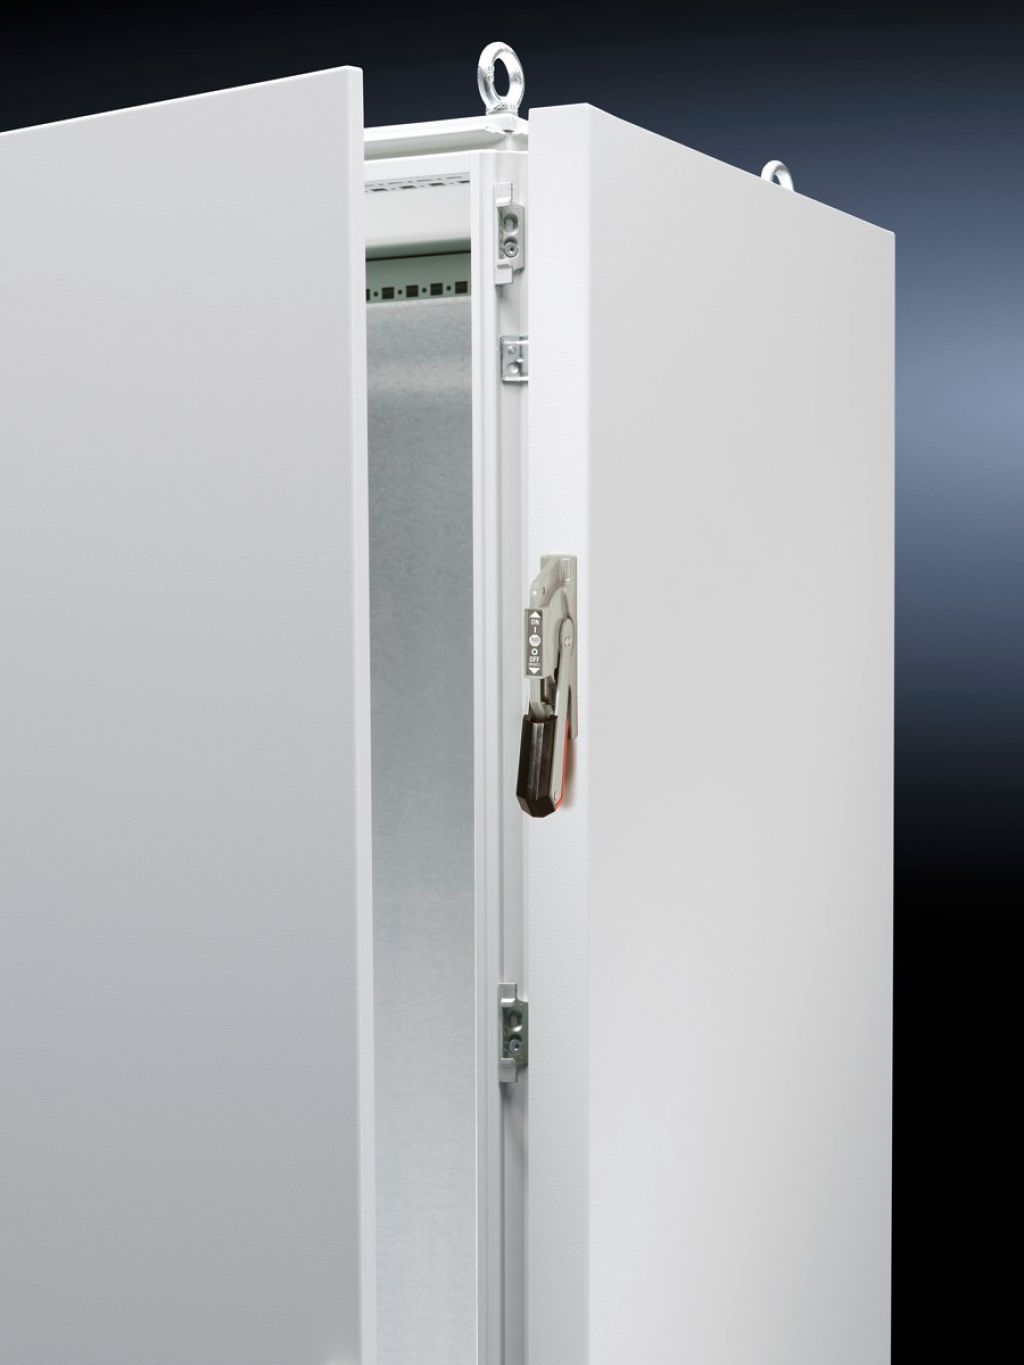 Isolator door cover (US version), for TS